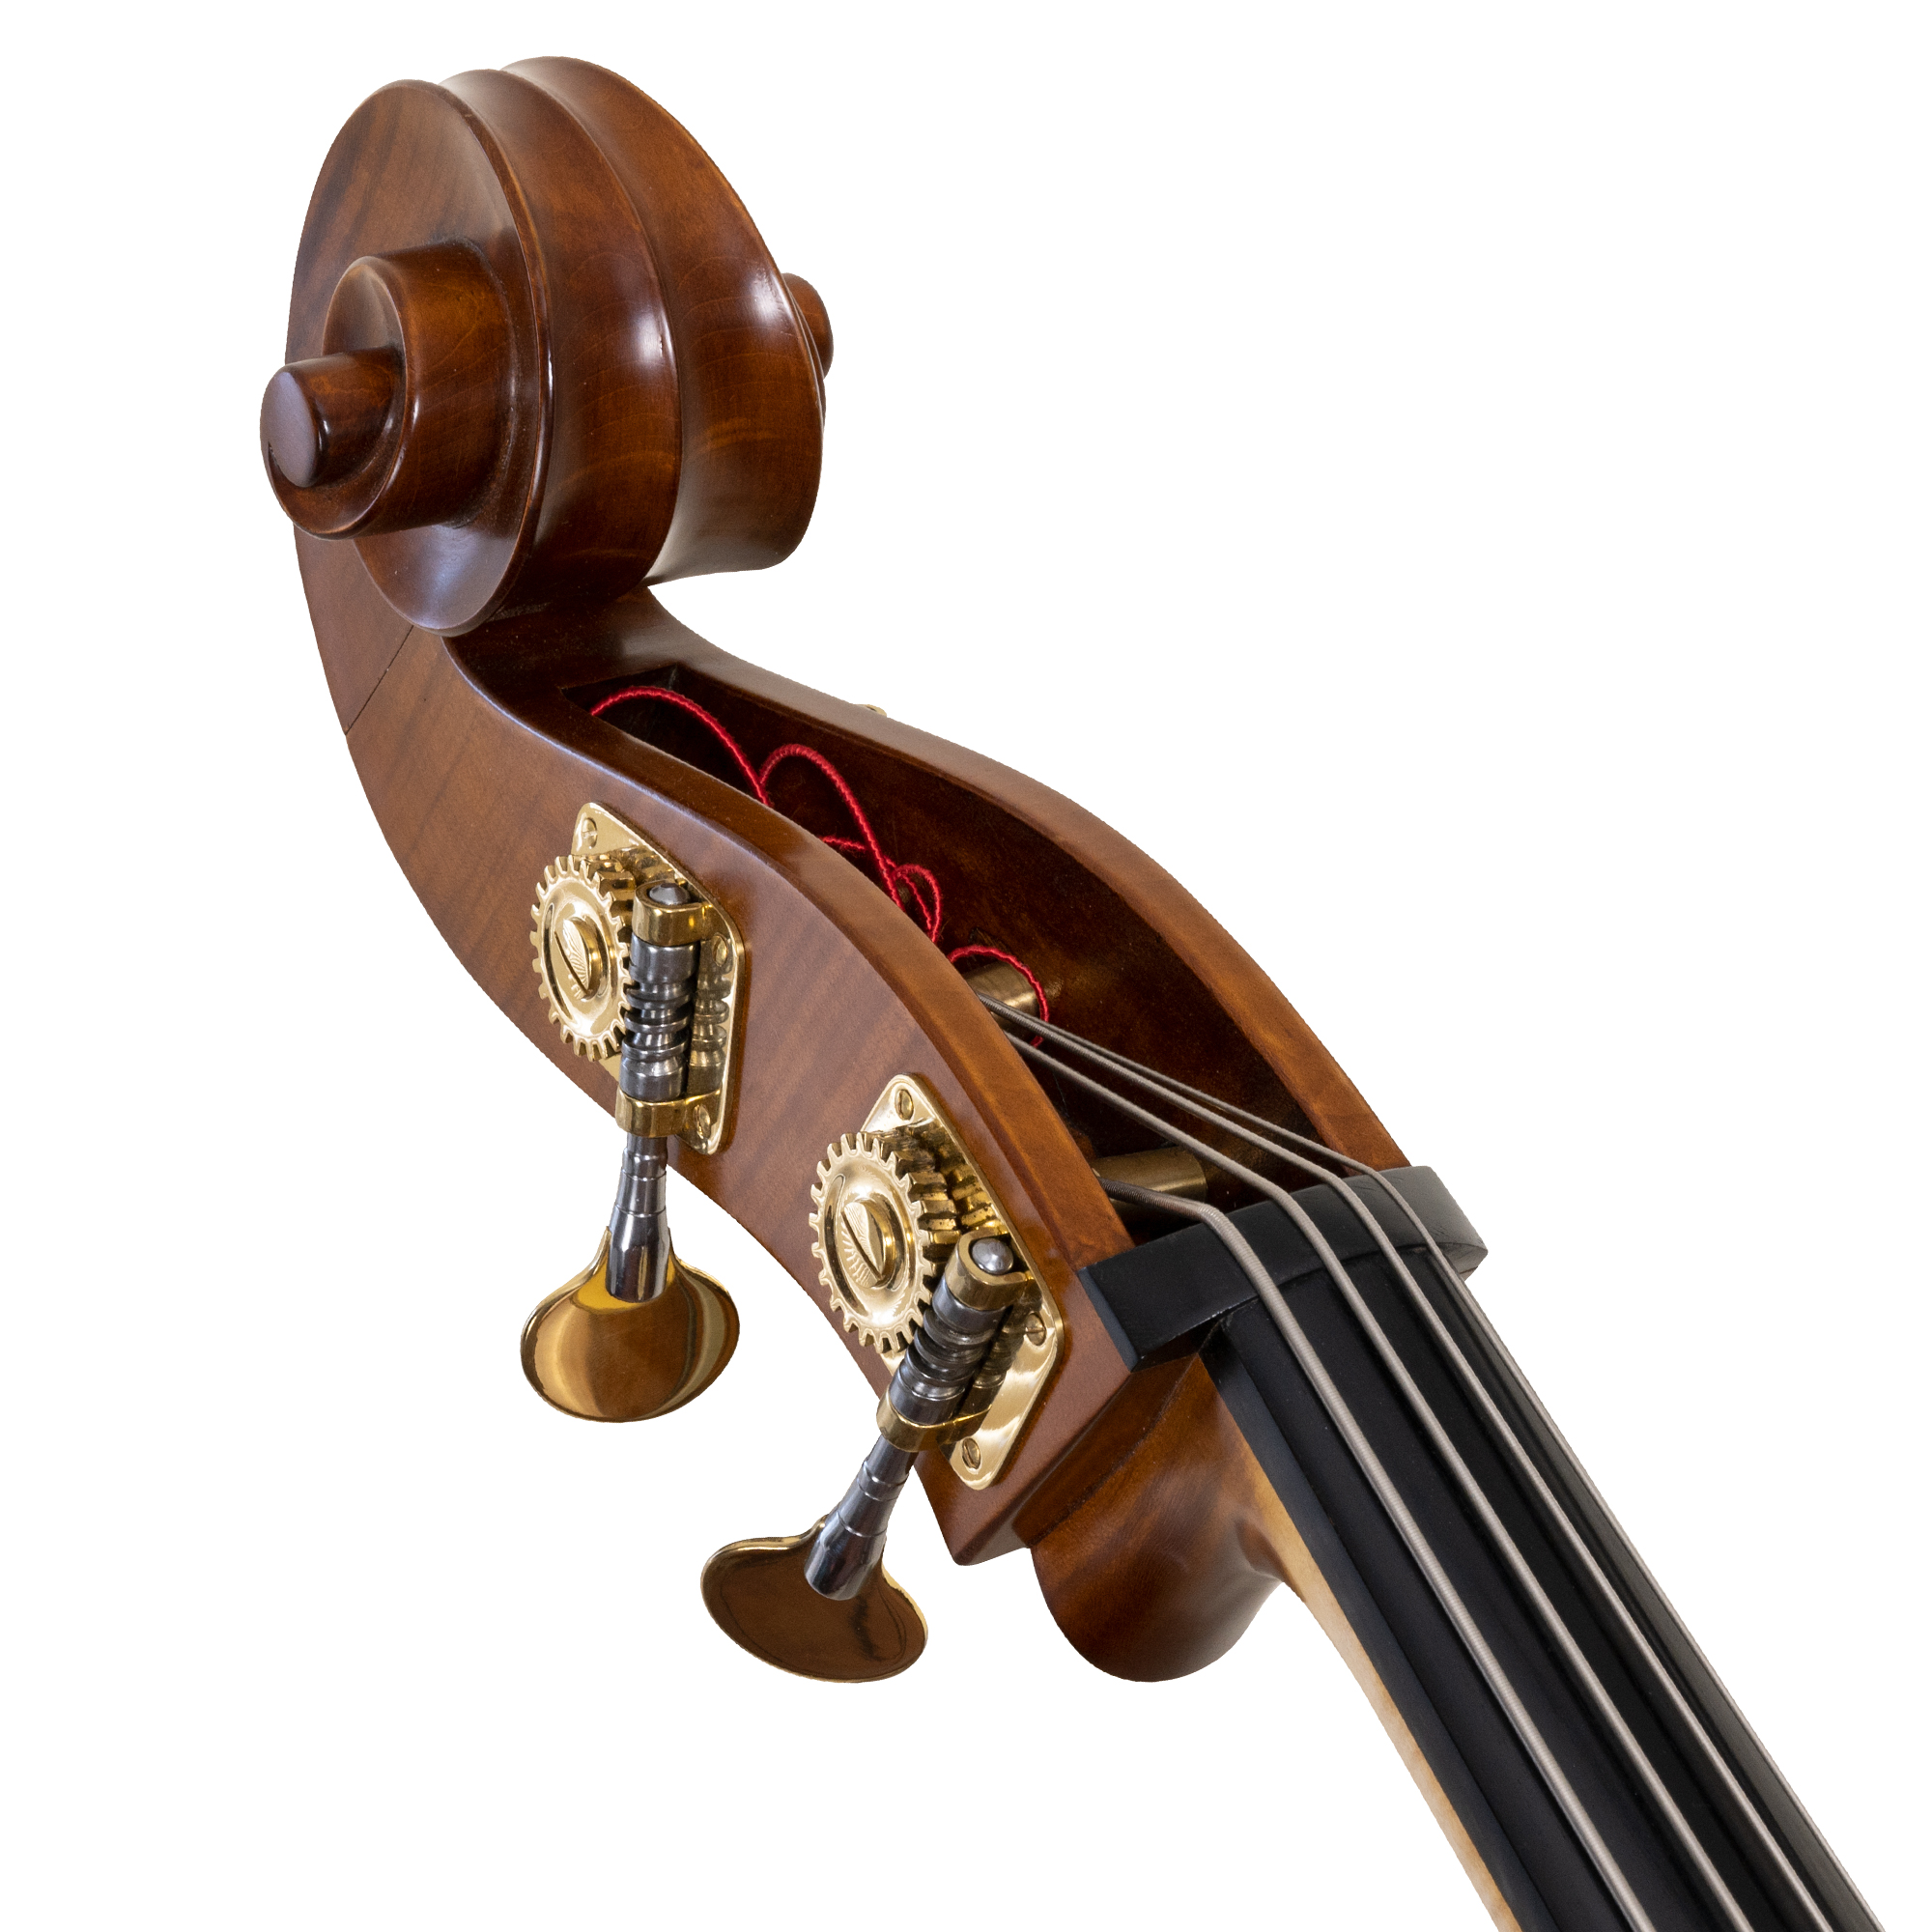 Bassworks Master Series Upright Bass in action